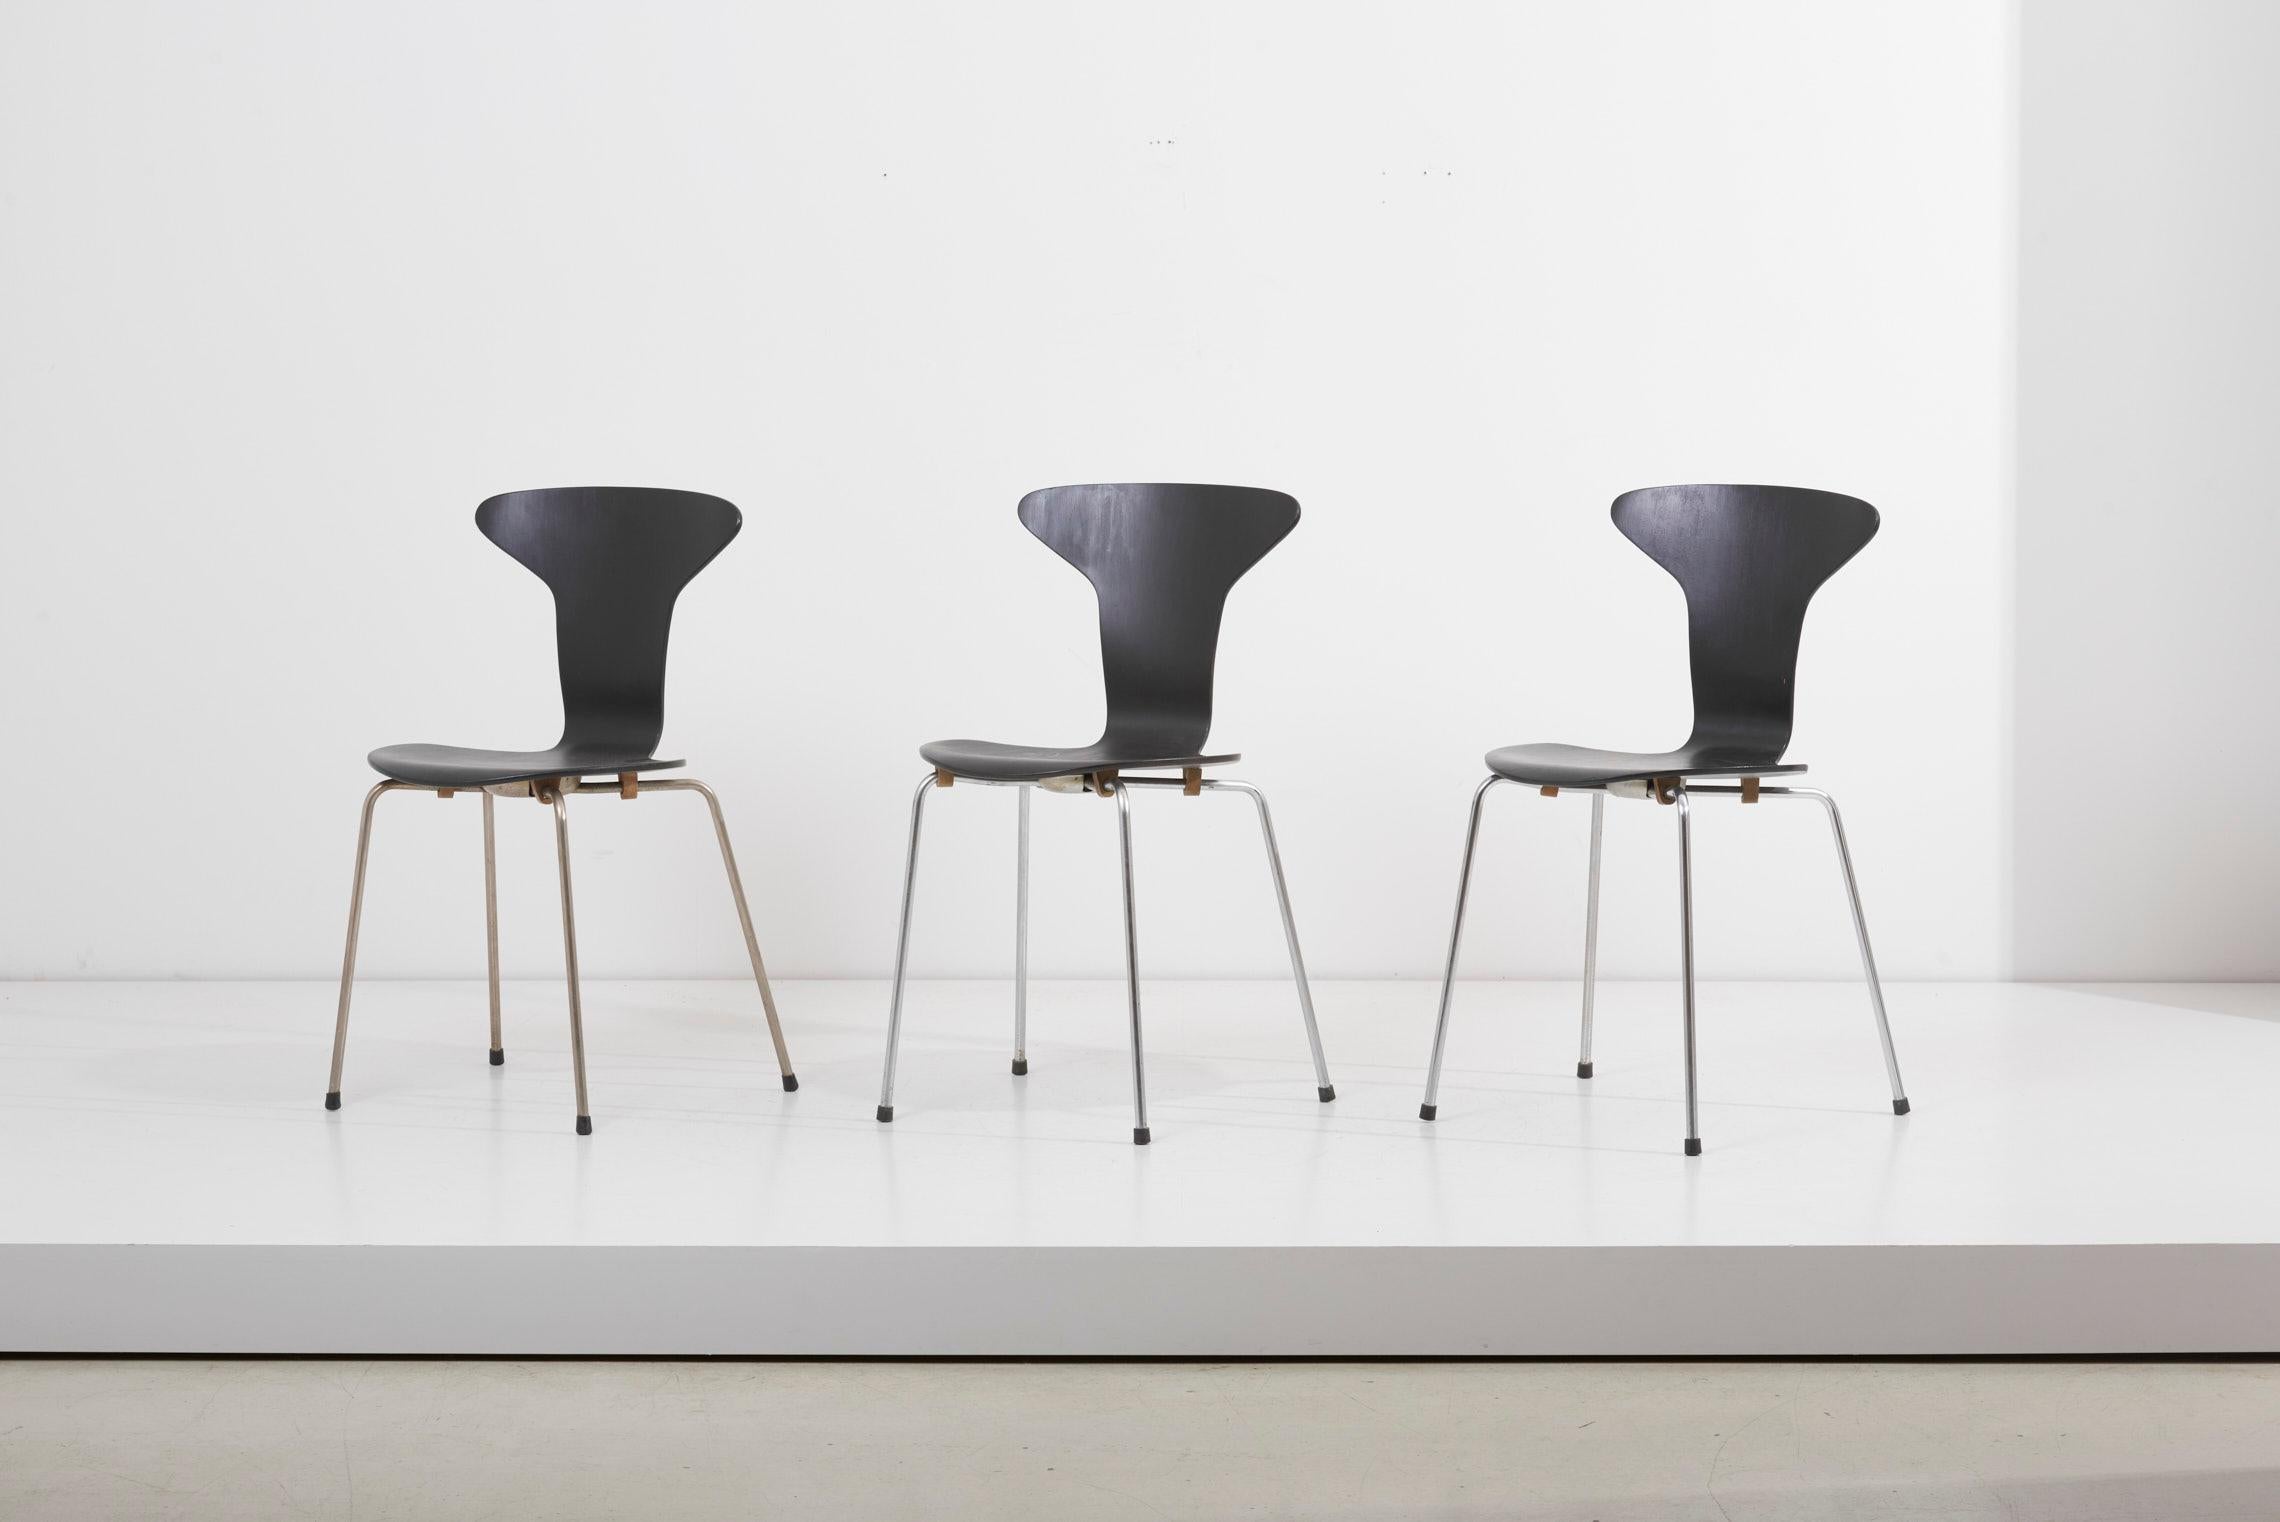 Set of 3 black 'Mosquito' Munkegård model no. 3105 chairs designed by Arne Jacobsen for Fritz Hansen, Denmark in the 1950s. stackable chairs are stackable and made of bent laminated plywood finished in black lacquer. Supported by sturdy chrome legs